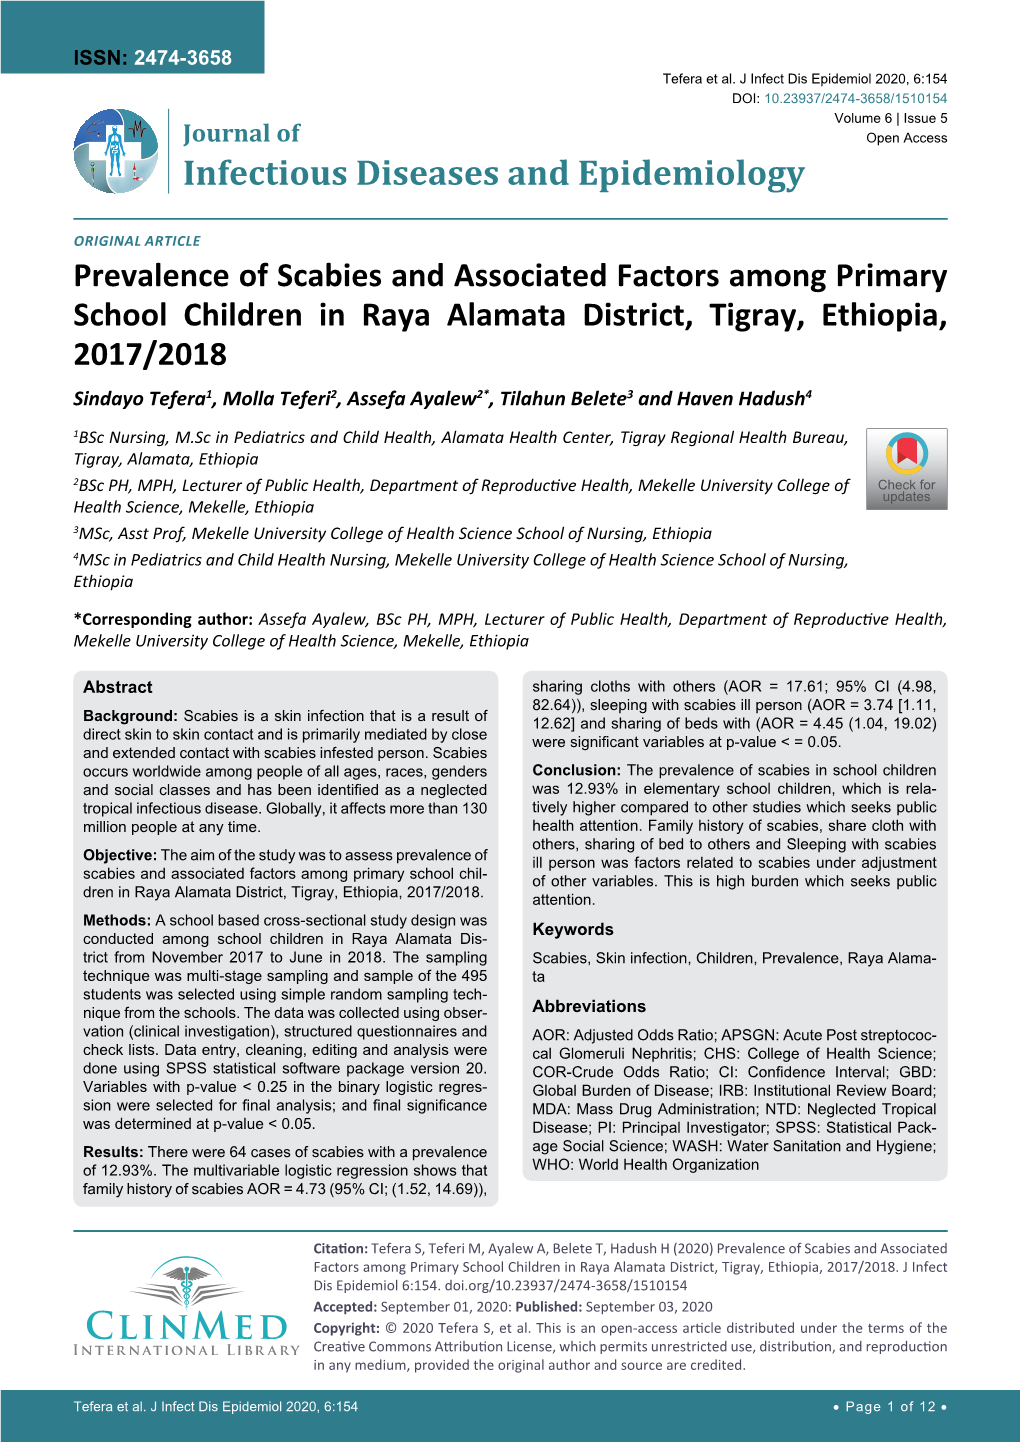 Prevalence of Scabies and Associated Factors Among Primary School